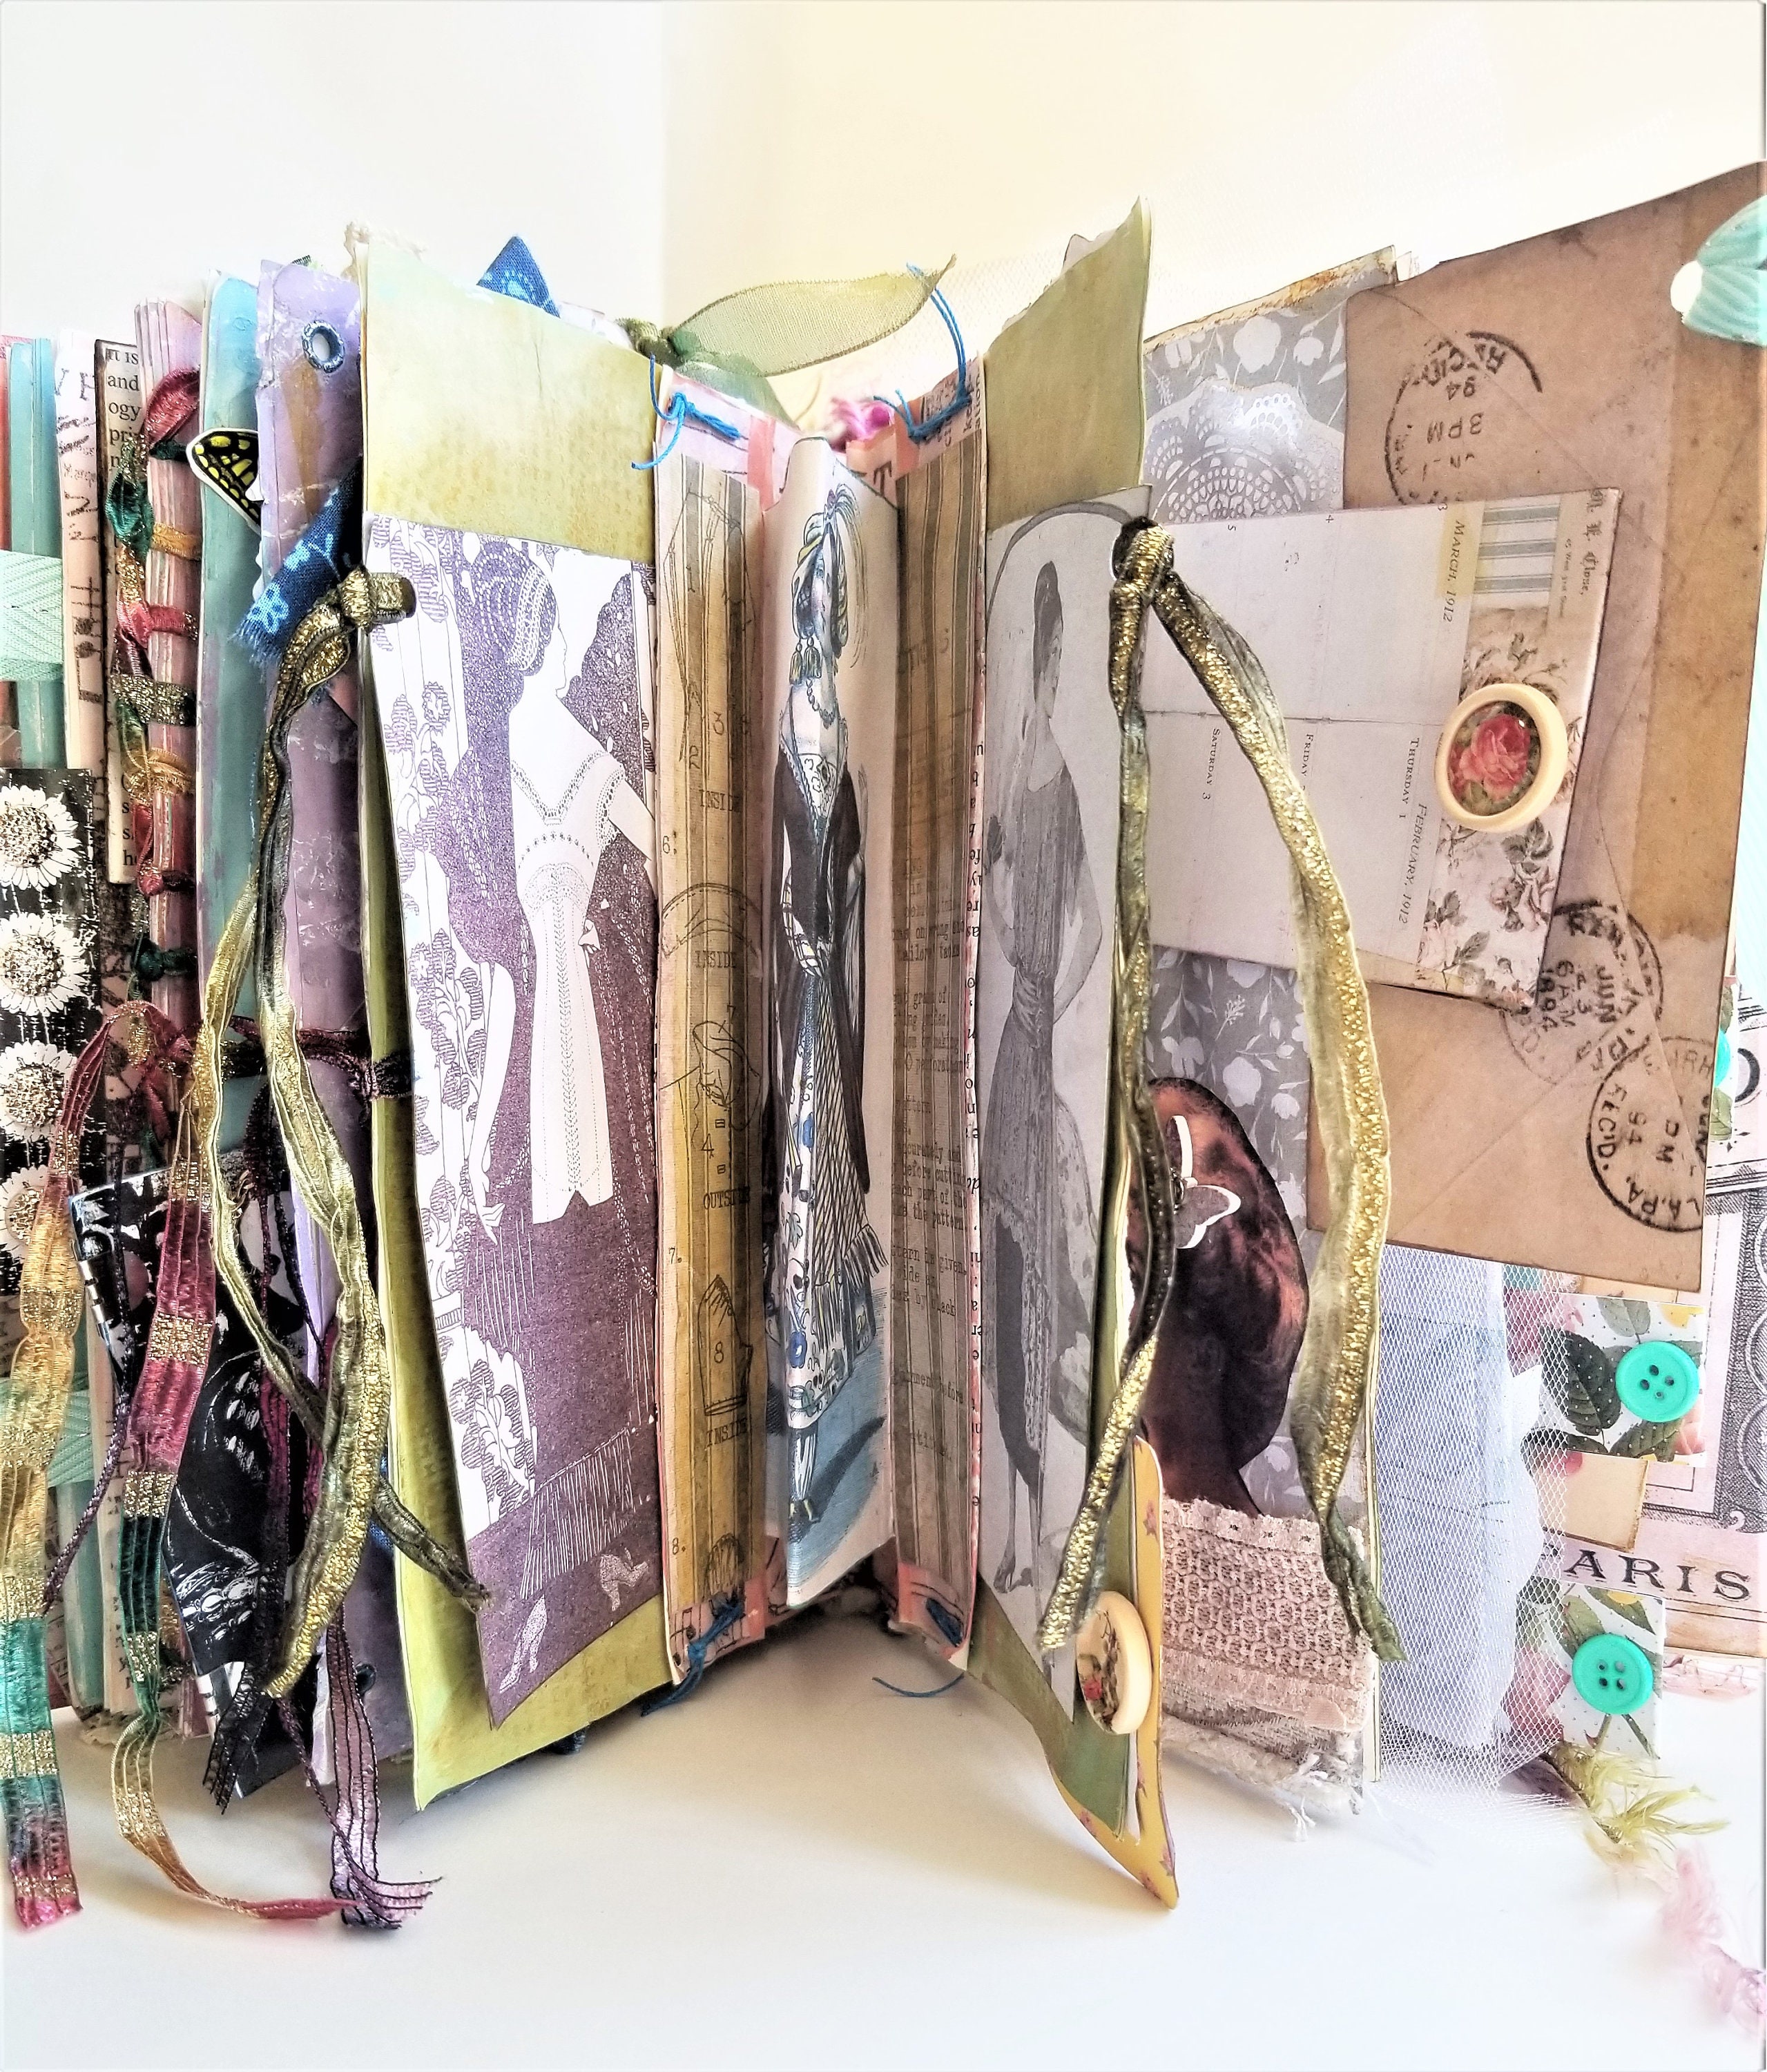 1 Theme - 28 Collages: A Flip Through of My Altered Book Collage